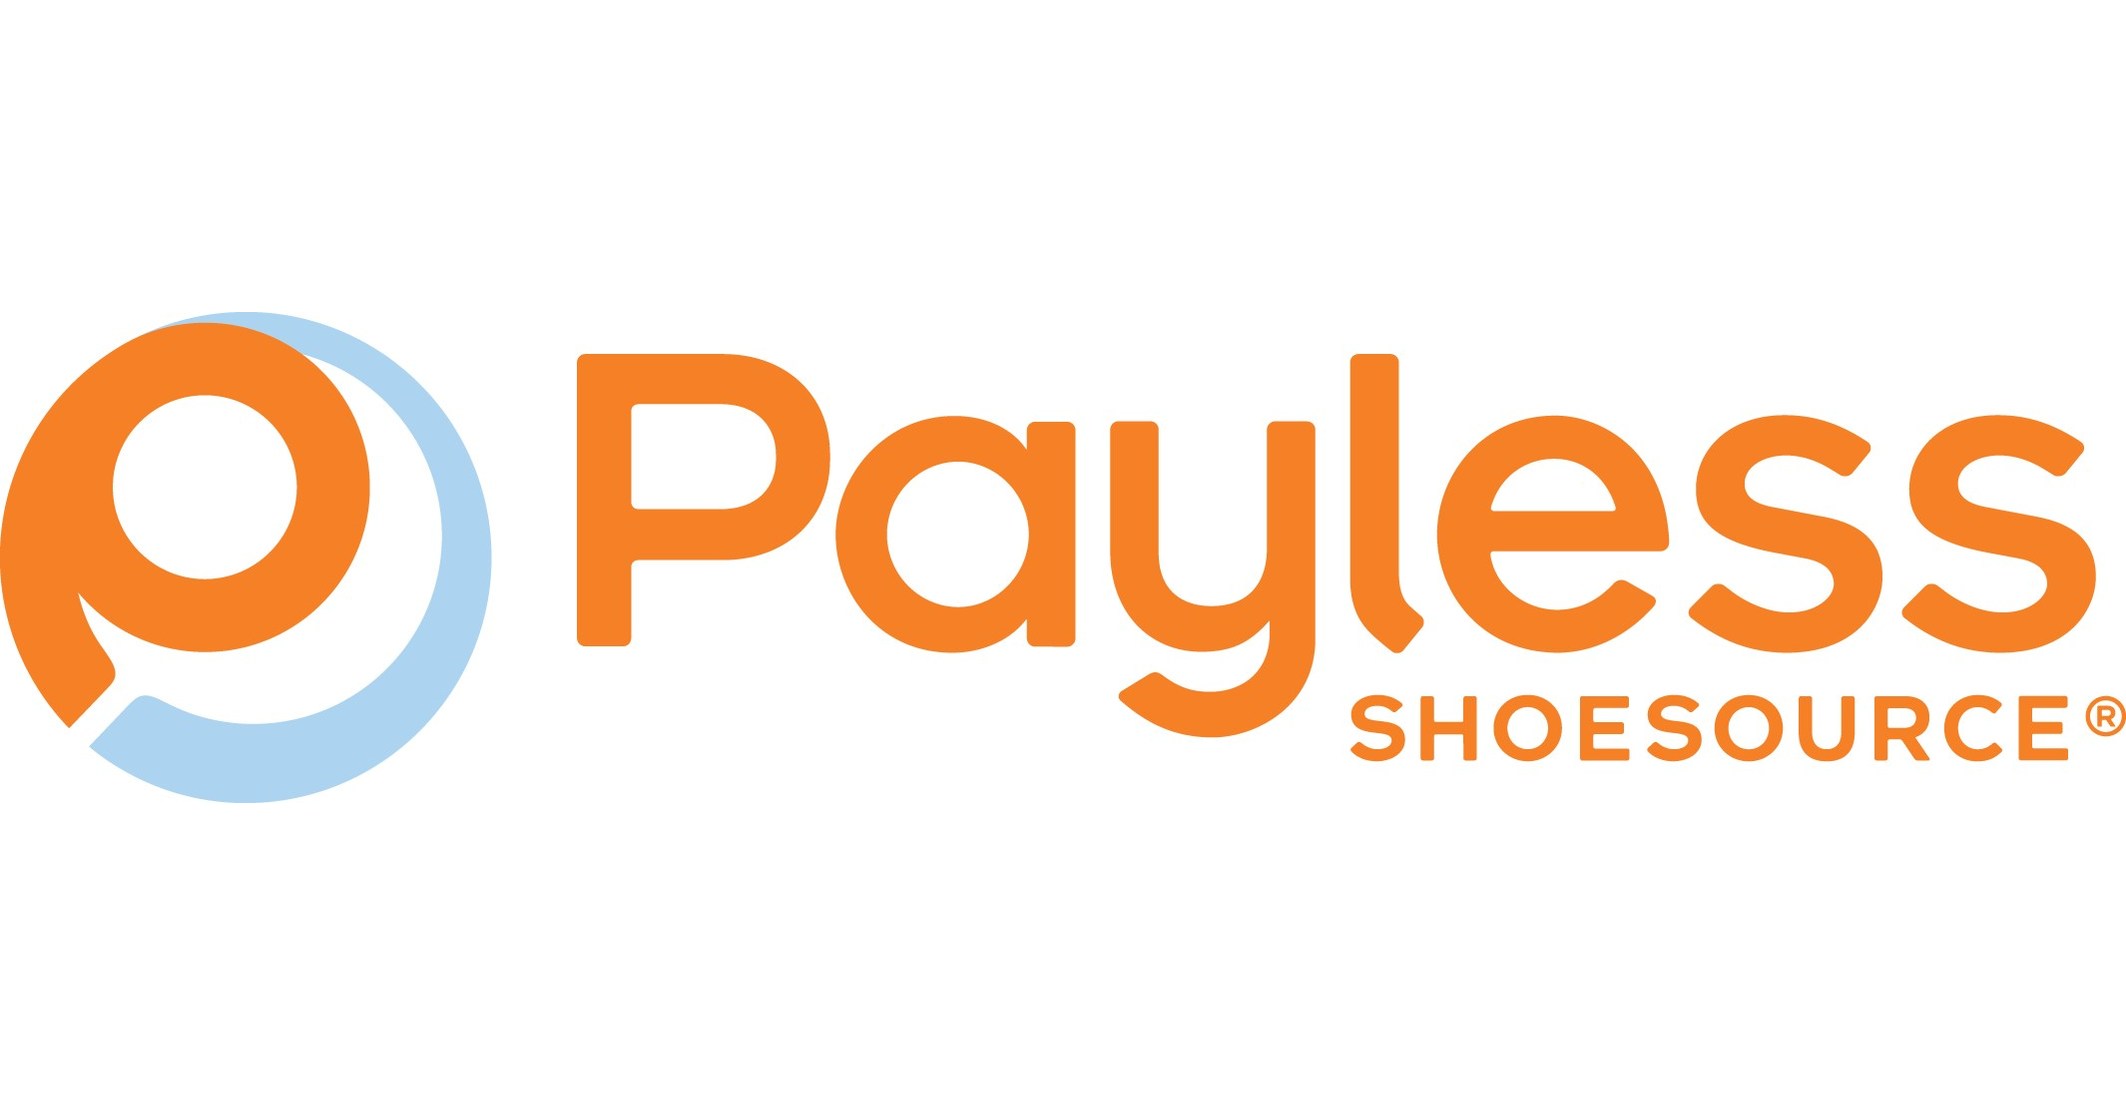 Payless Shoesource Announces Additional